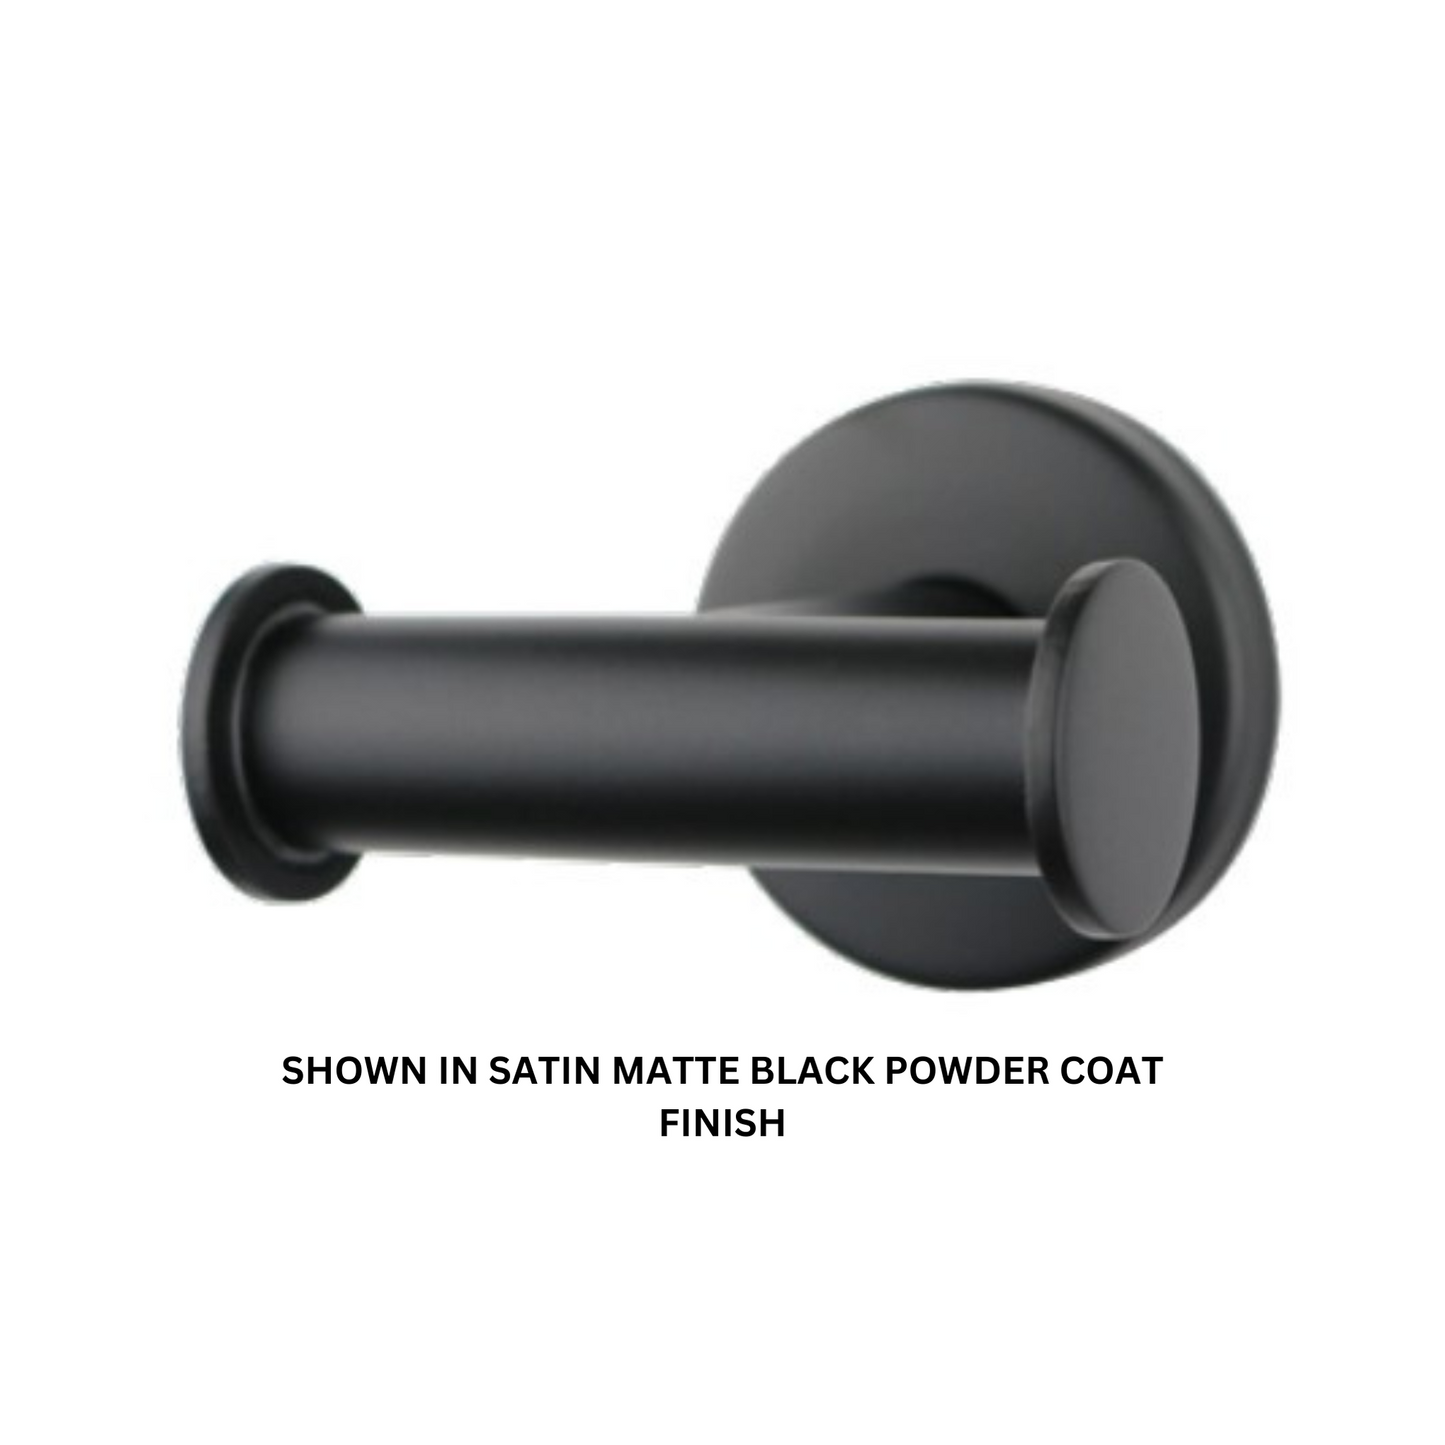 Seachrome Conorado Series 3.5" Black Powder Coat Concealed Mounting Flange Double Robe Hook